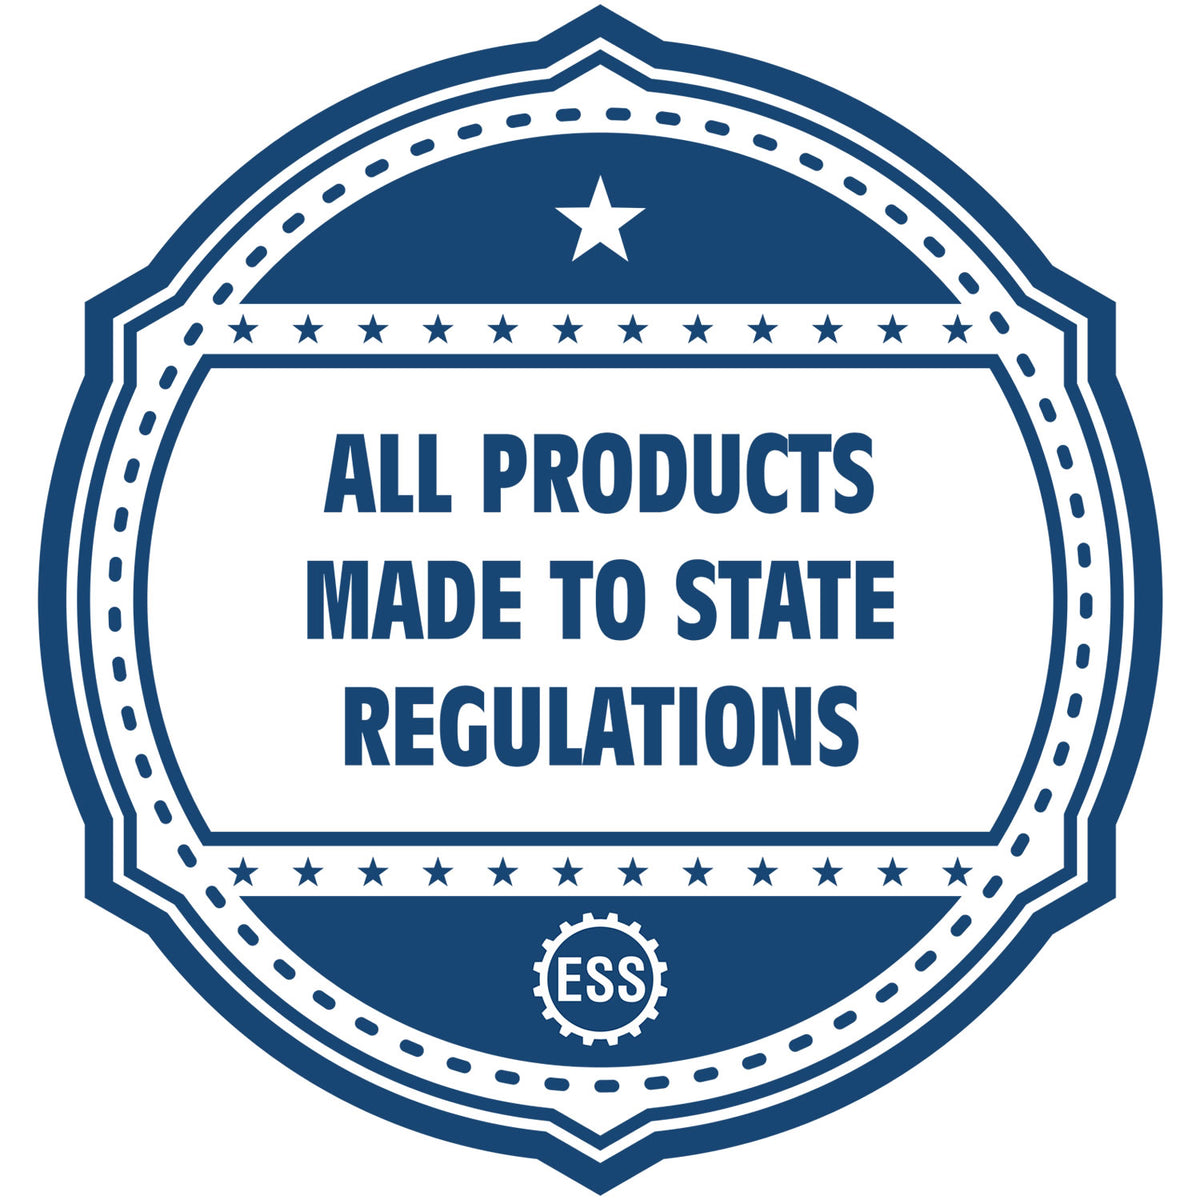 An icon or badge element for the Slim Pre-Inked Connecticut Landscape Architect Seal Stamp showing that this product is made in compliance with state regulations.